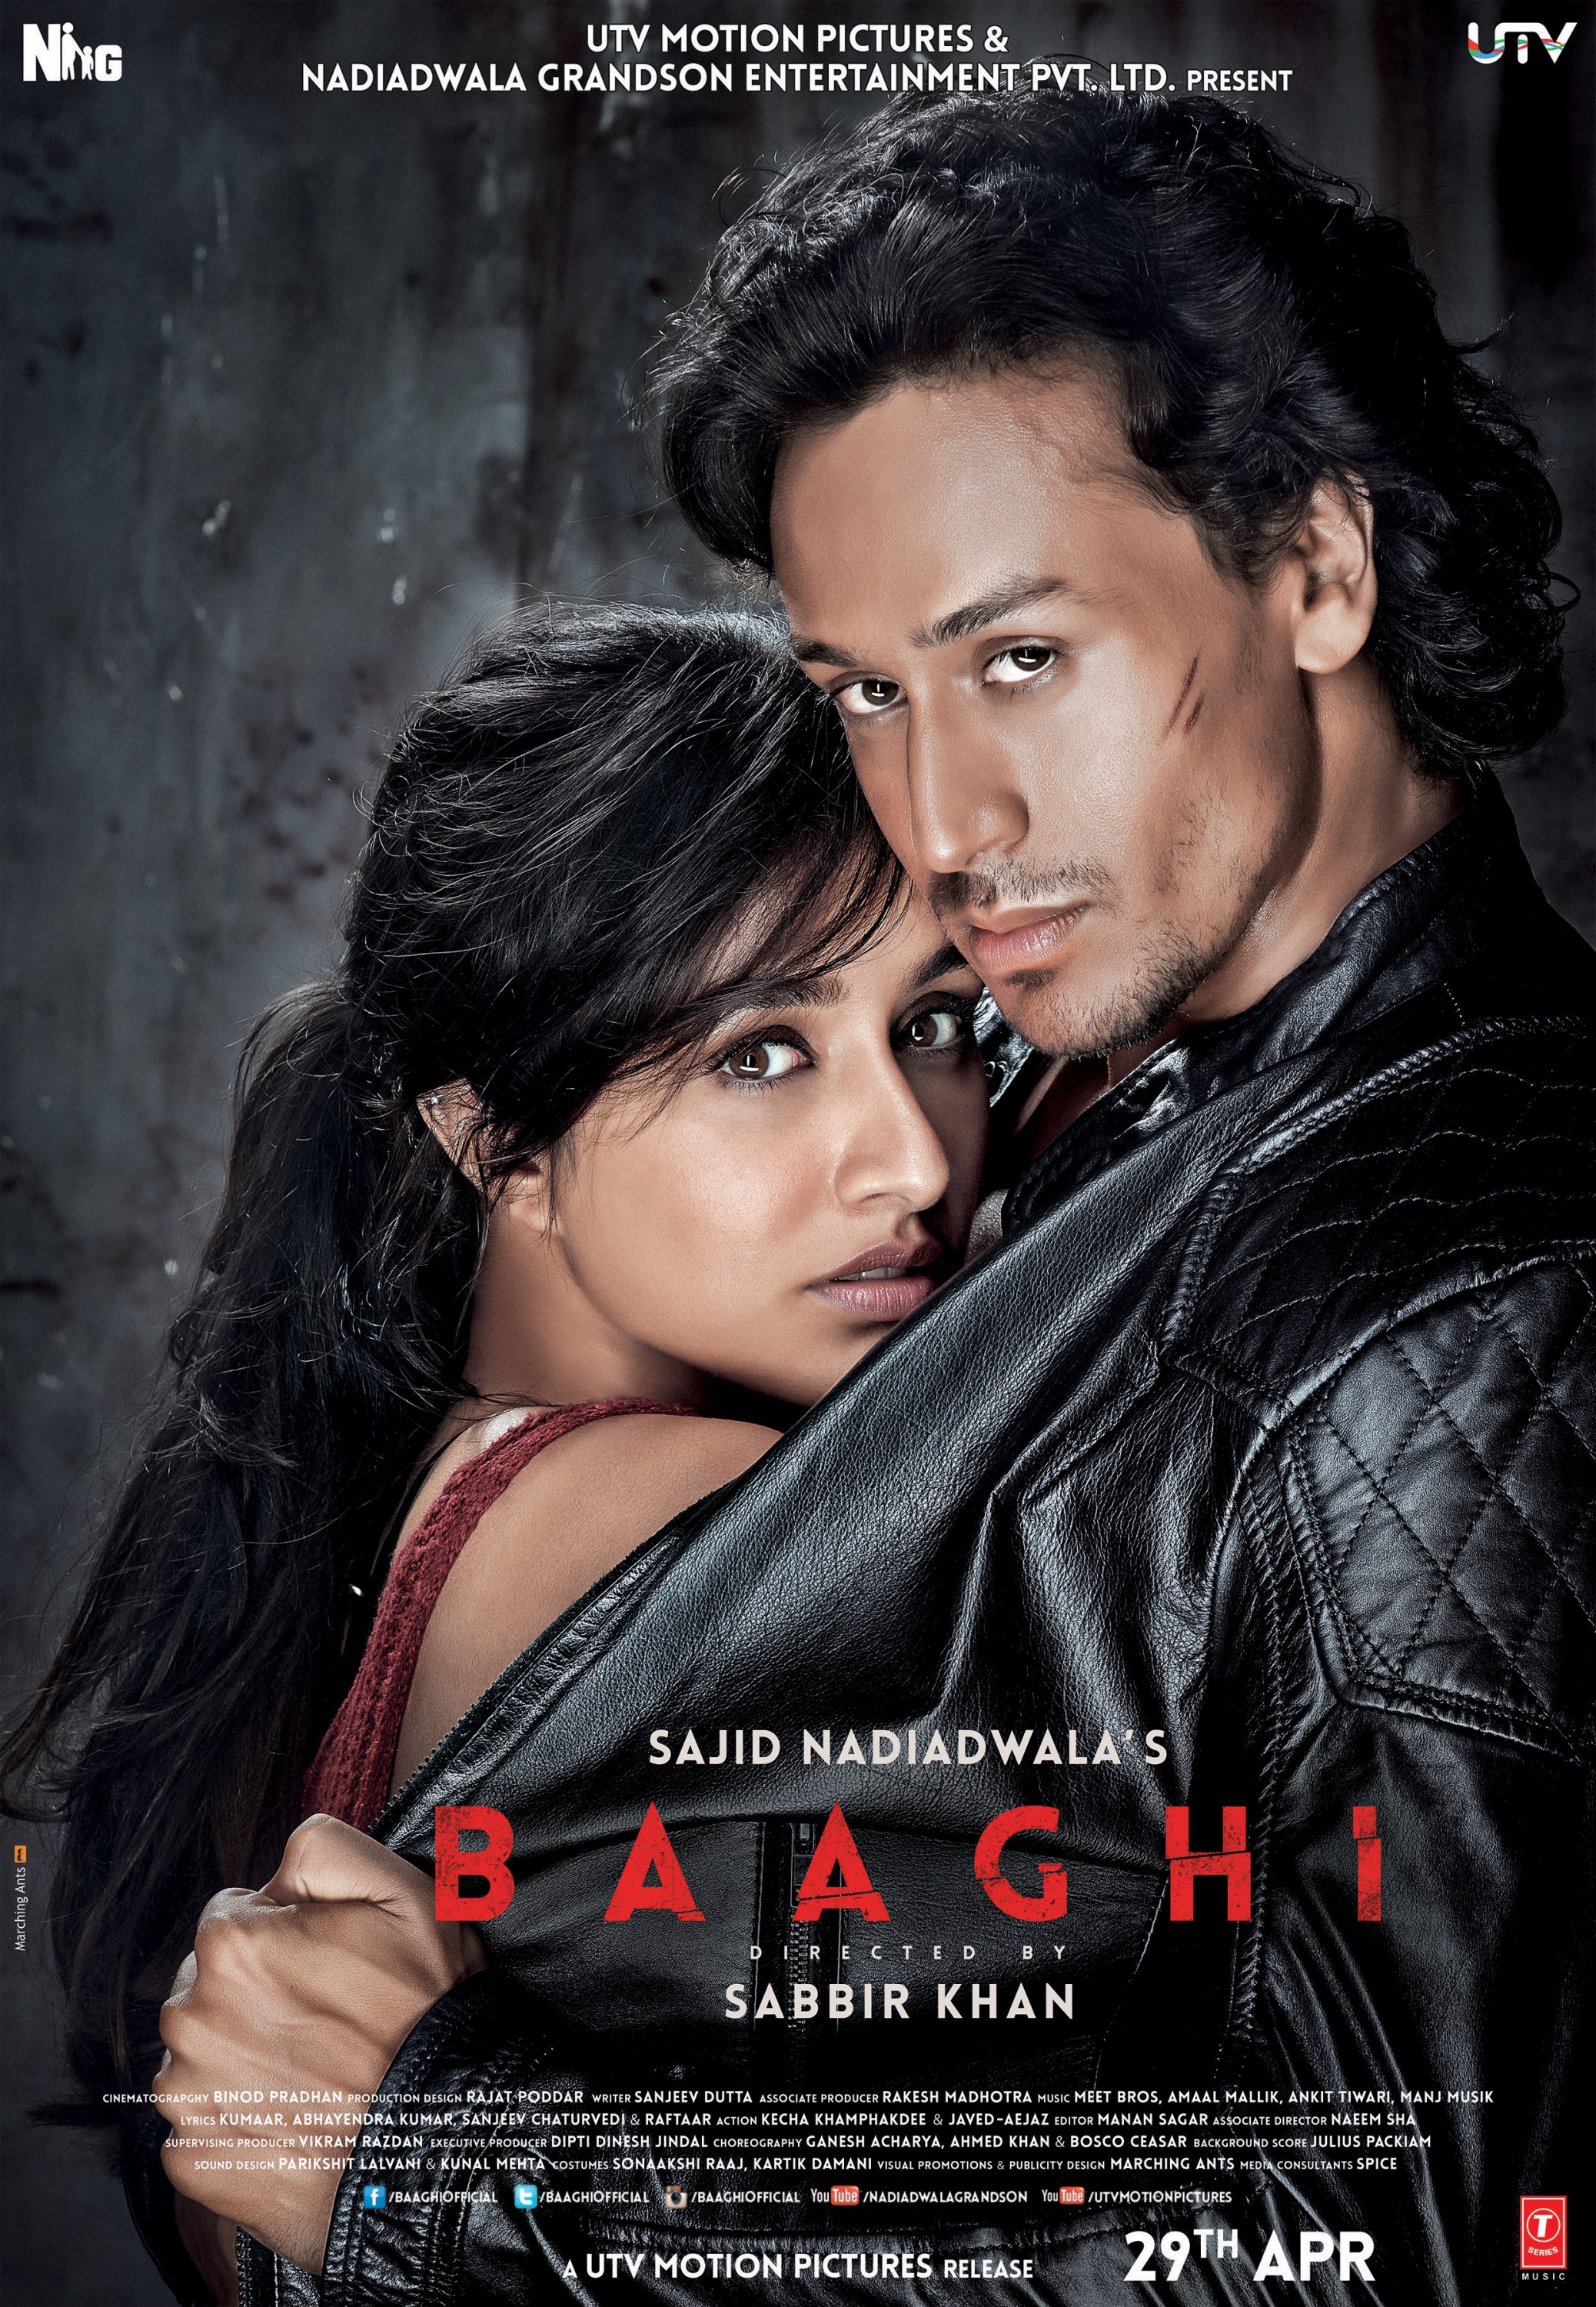 Mega Sized Movie Poster Image for Baaghi (#2 of 7)